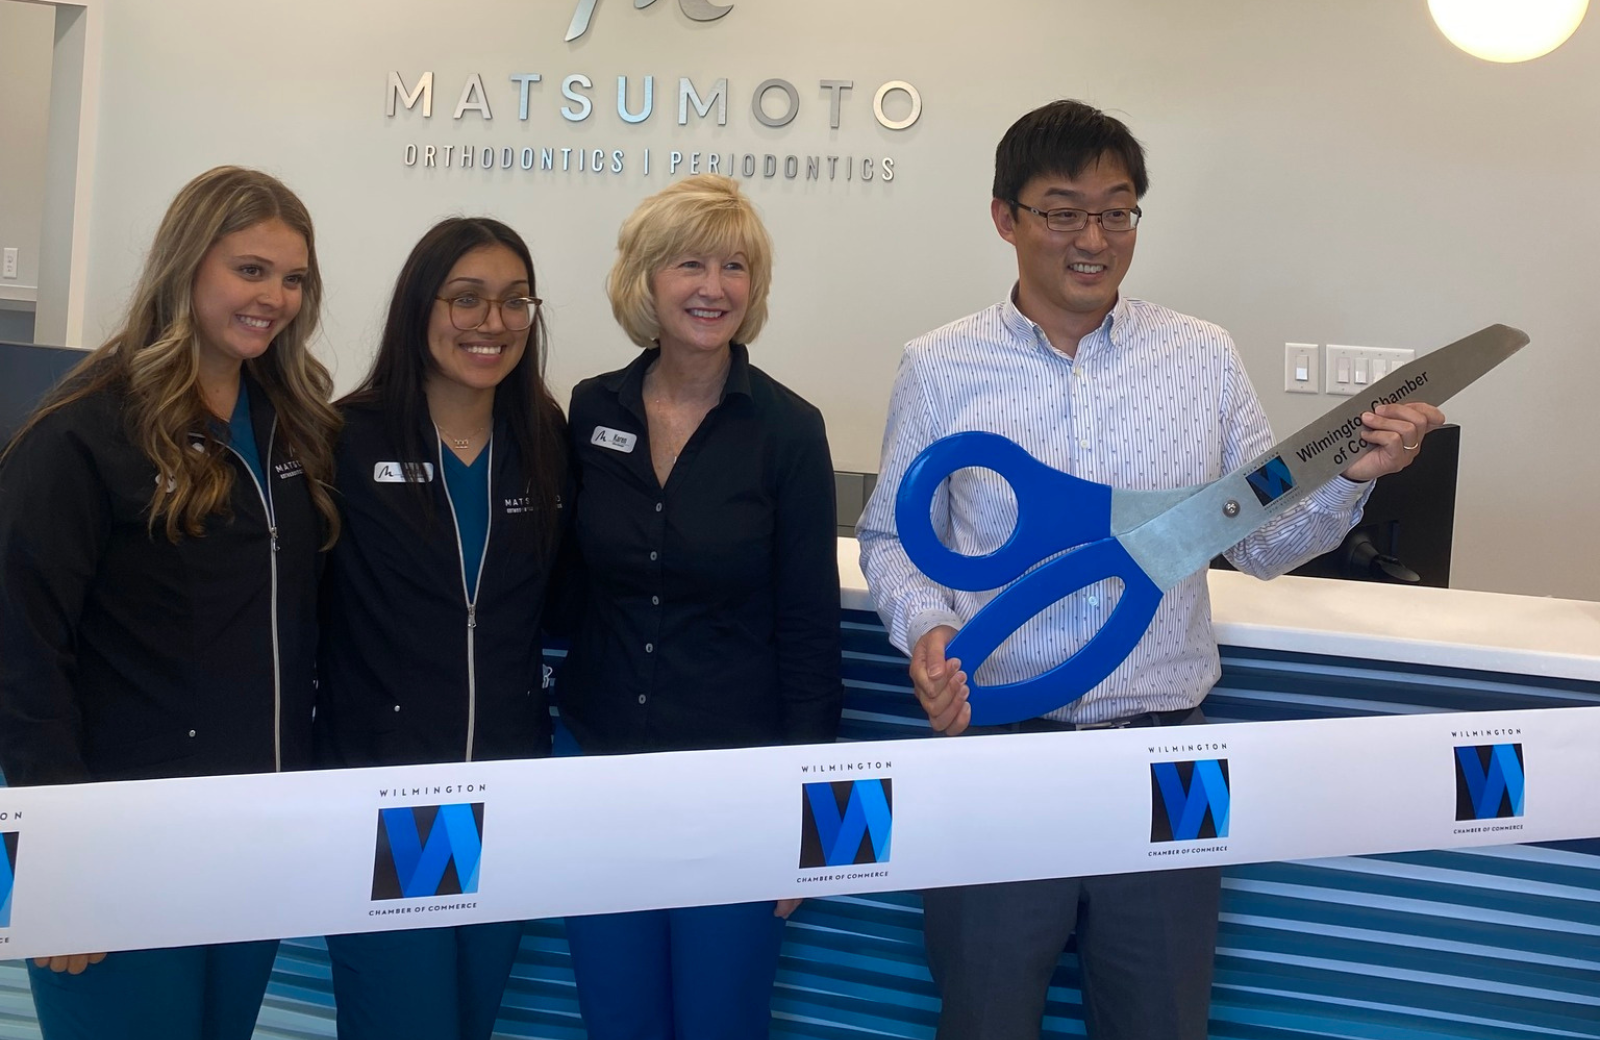 orthodontist matsumoto stands with orthodontic team holding giant scissors for cutting a ribbon